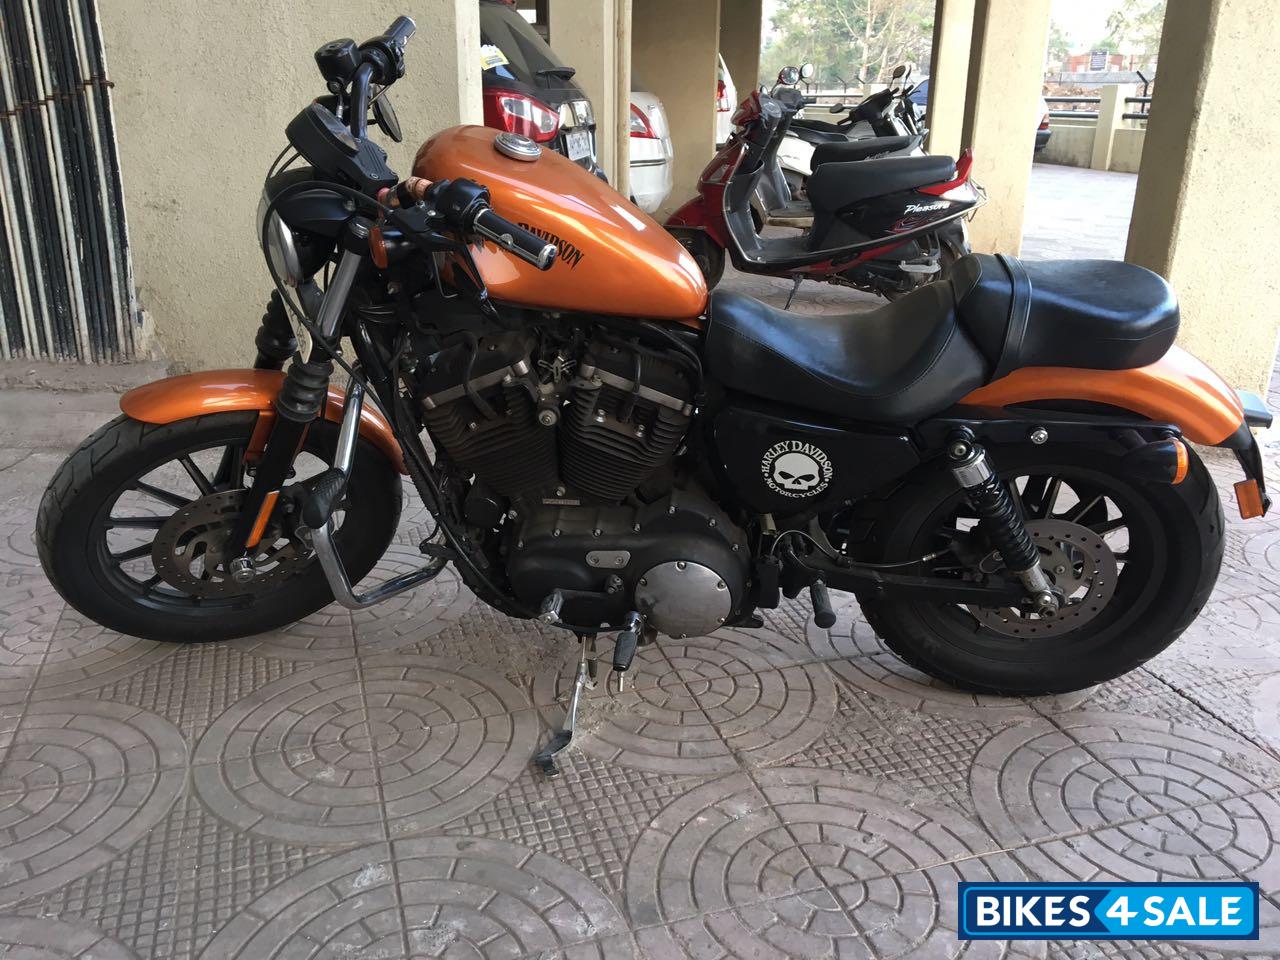 Used 2014 Model Harley Davidson Iron 883 For Sale In Pune Id 208896 Bikes4sale